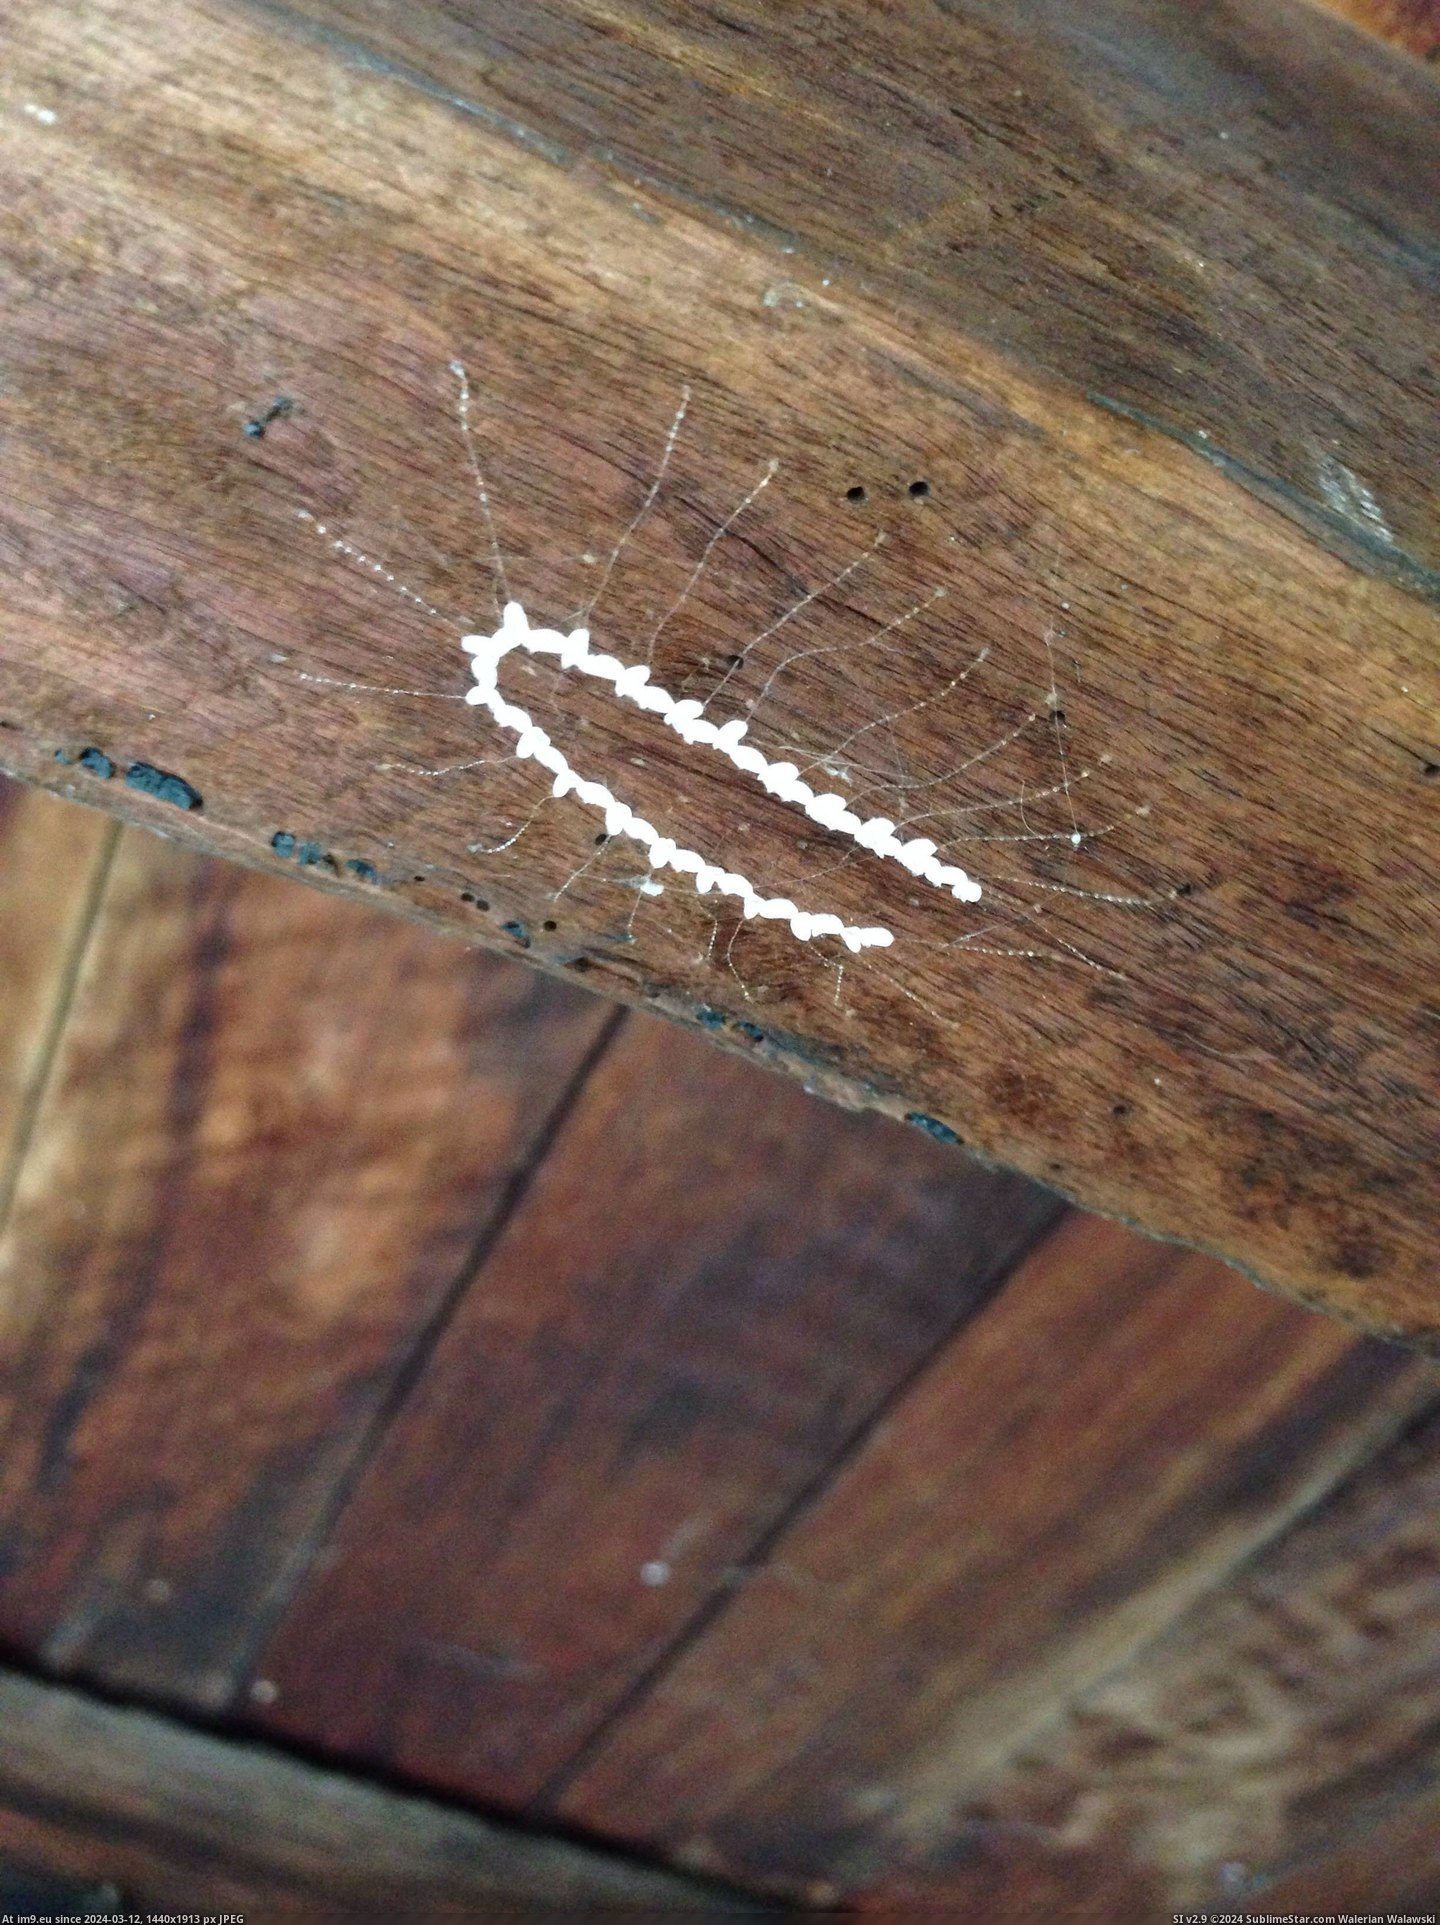 #Wtf #House #Thought #Uncles #Rafters #Australia #Hanging #Considered [Mildlyinteresting] Found this hanging from the rafters under my uncles house in Australia. Considered WTF- thought twice... Pic. (Image of album ))